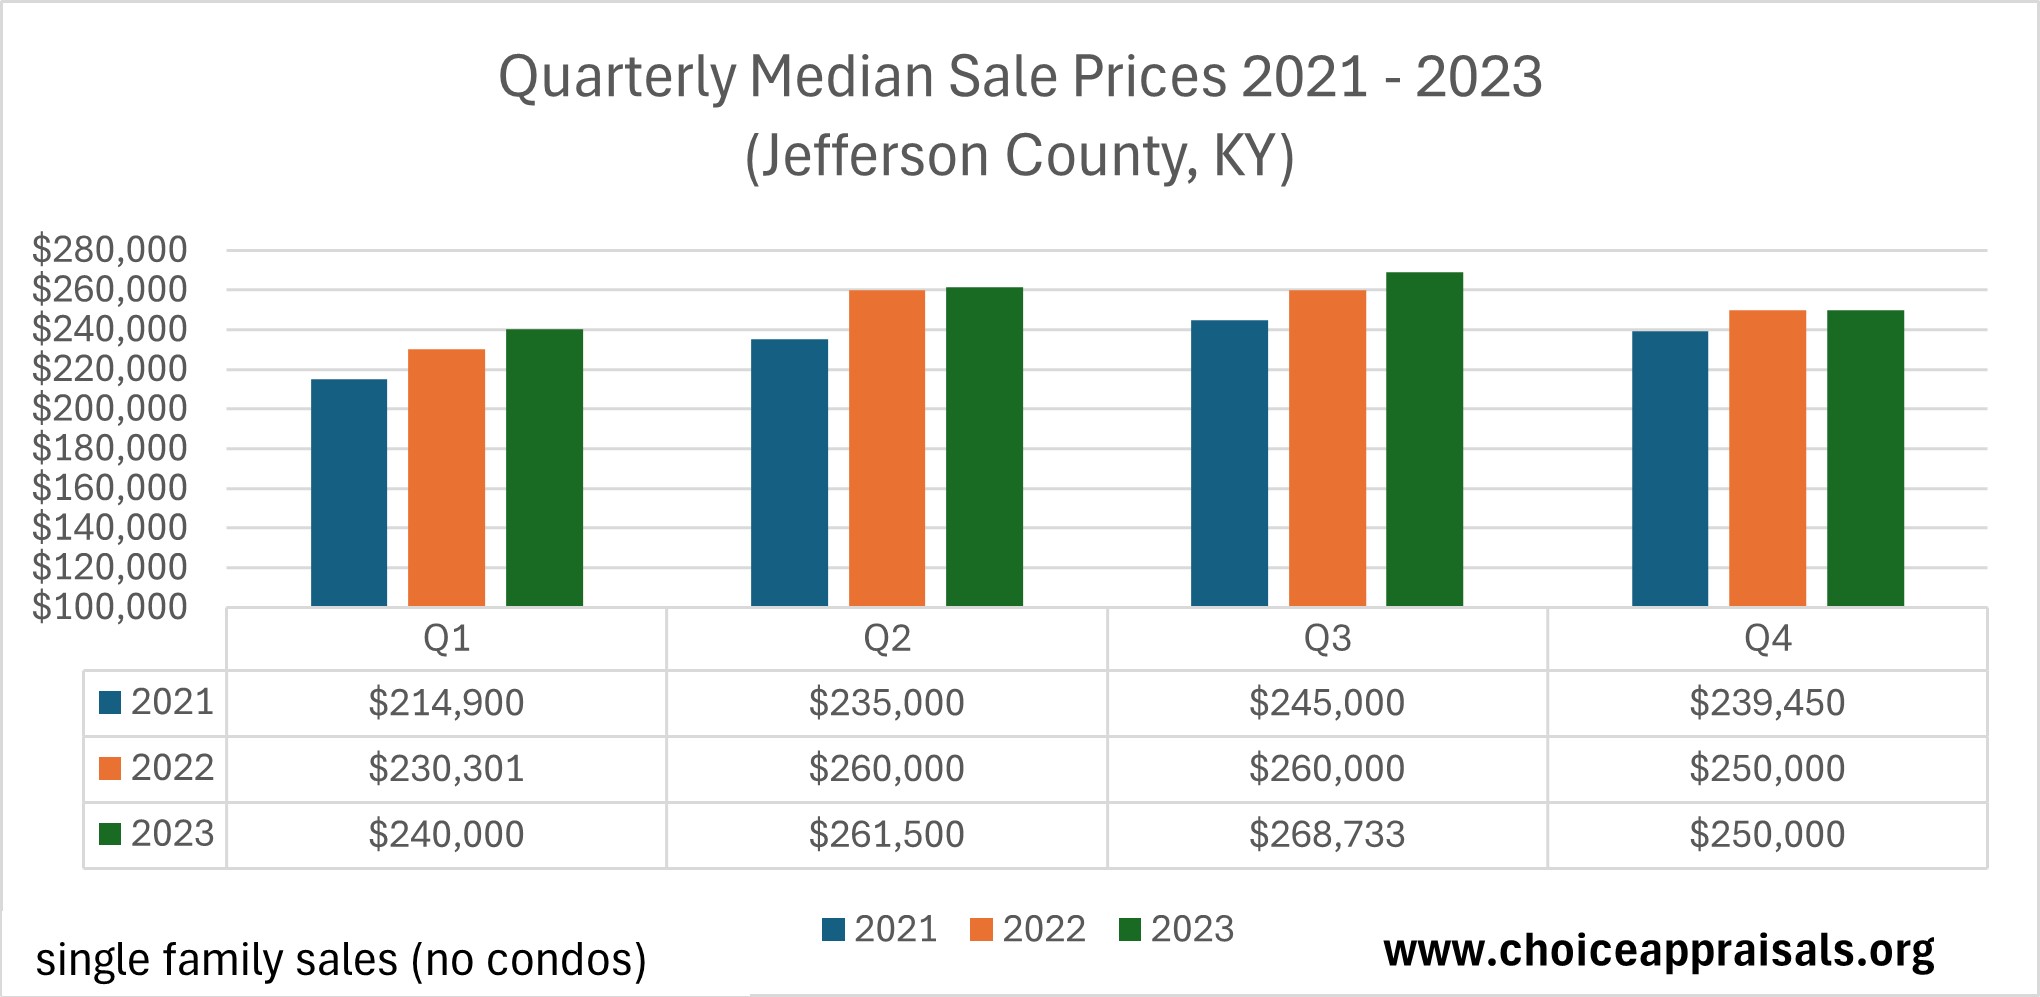 Bar chart displaying the quarterly median sale prices for single-family homes in Jefferson County, KY from 2021 to 2023. Each year is color-coded, with consistent growth in median prices over the quarters. The first quarter starts at $214,900 in 2021 and rises to $240,000 in 2023. The chart shows seasonal and annual trends, with peaks typically in the second and third quarters each year. This visual data, excluding condo sales, is a valuable indicator of the local housing market's health and trajectory, sourced from www.choiceappraisals.org.